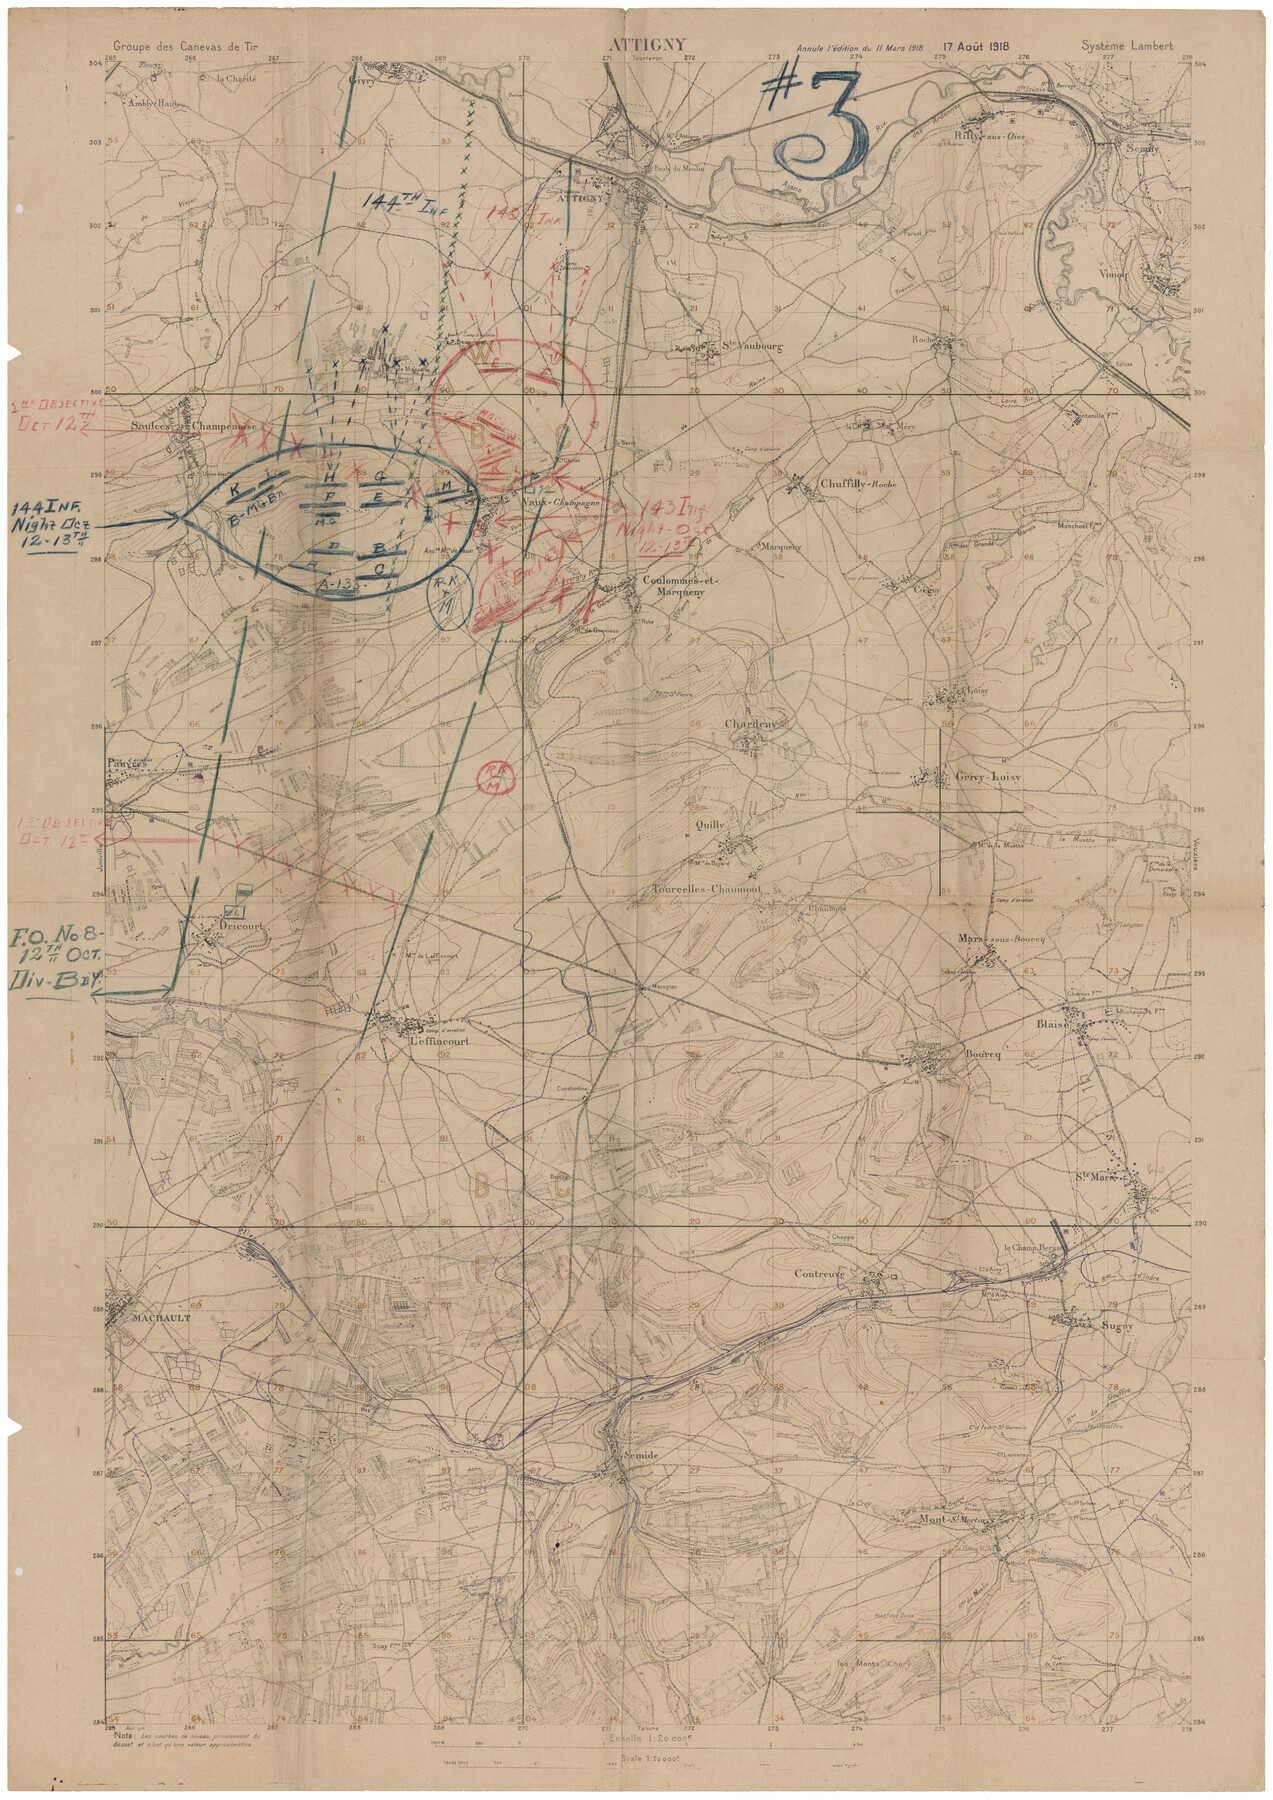 94135, [Movements & Objectives of the 143rd & 144th Infantry on October 12-13, 1918], Non-GLO Digital Images